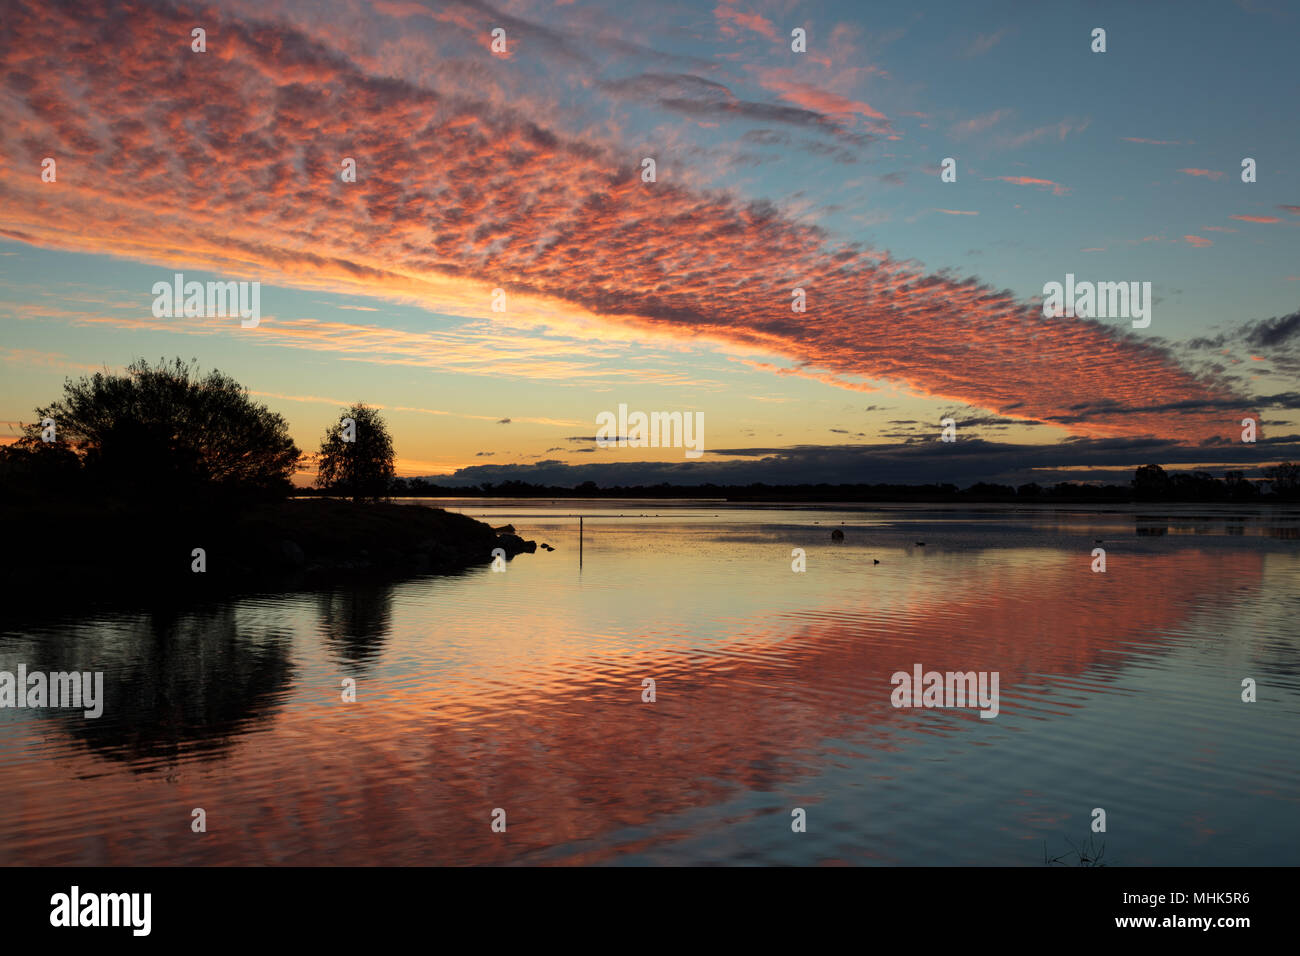 Condobolin, New South Wales, Australia. Radiant clouds and reflections at sunset at Gum Bend Lake in Condobolin in south western New South Wales. Stock Photo